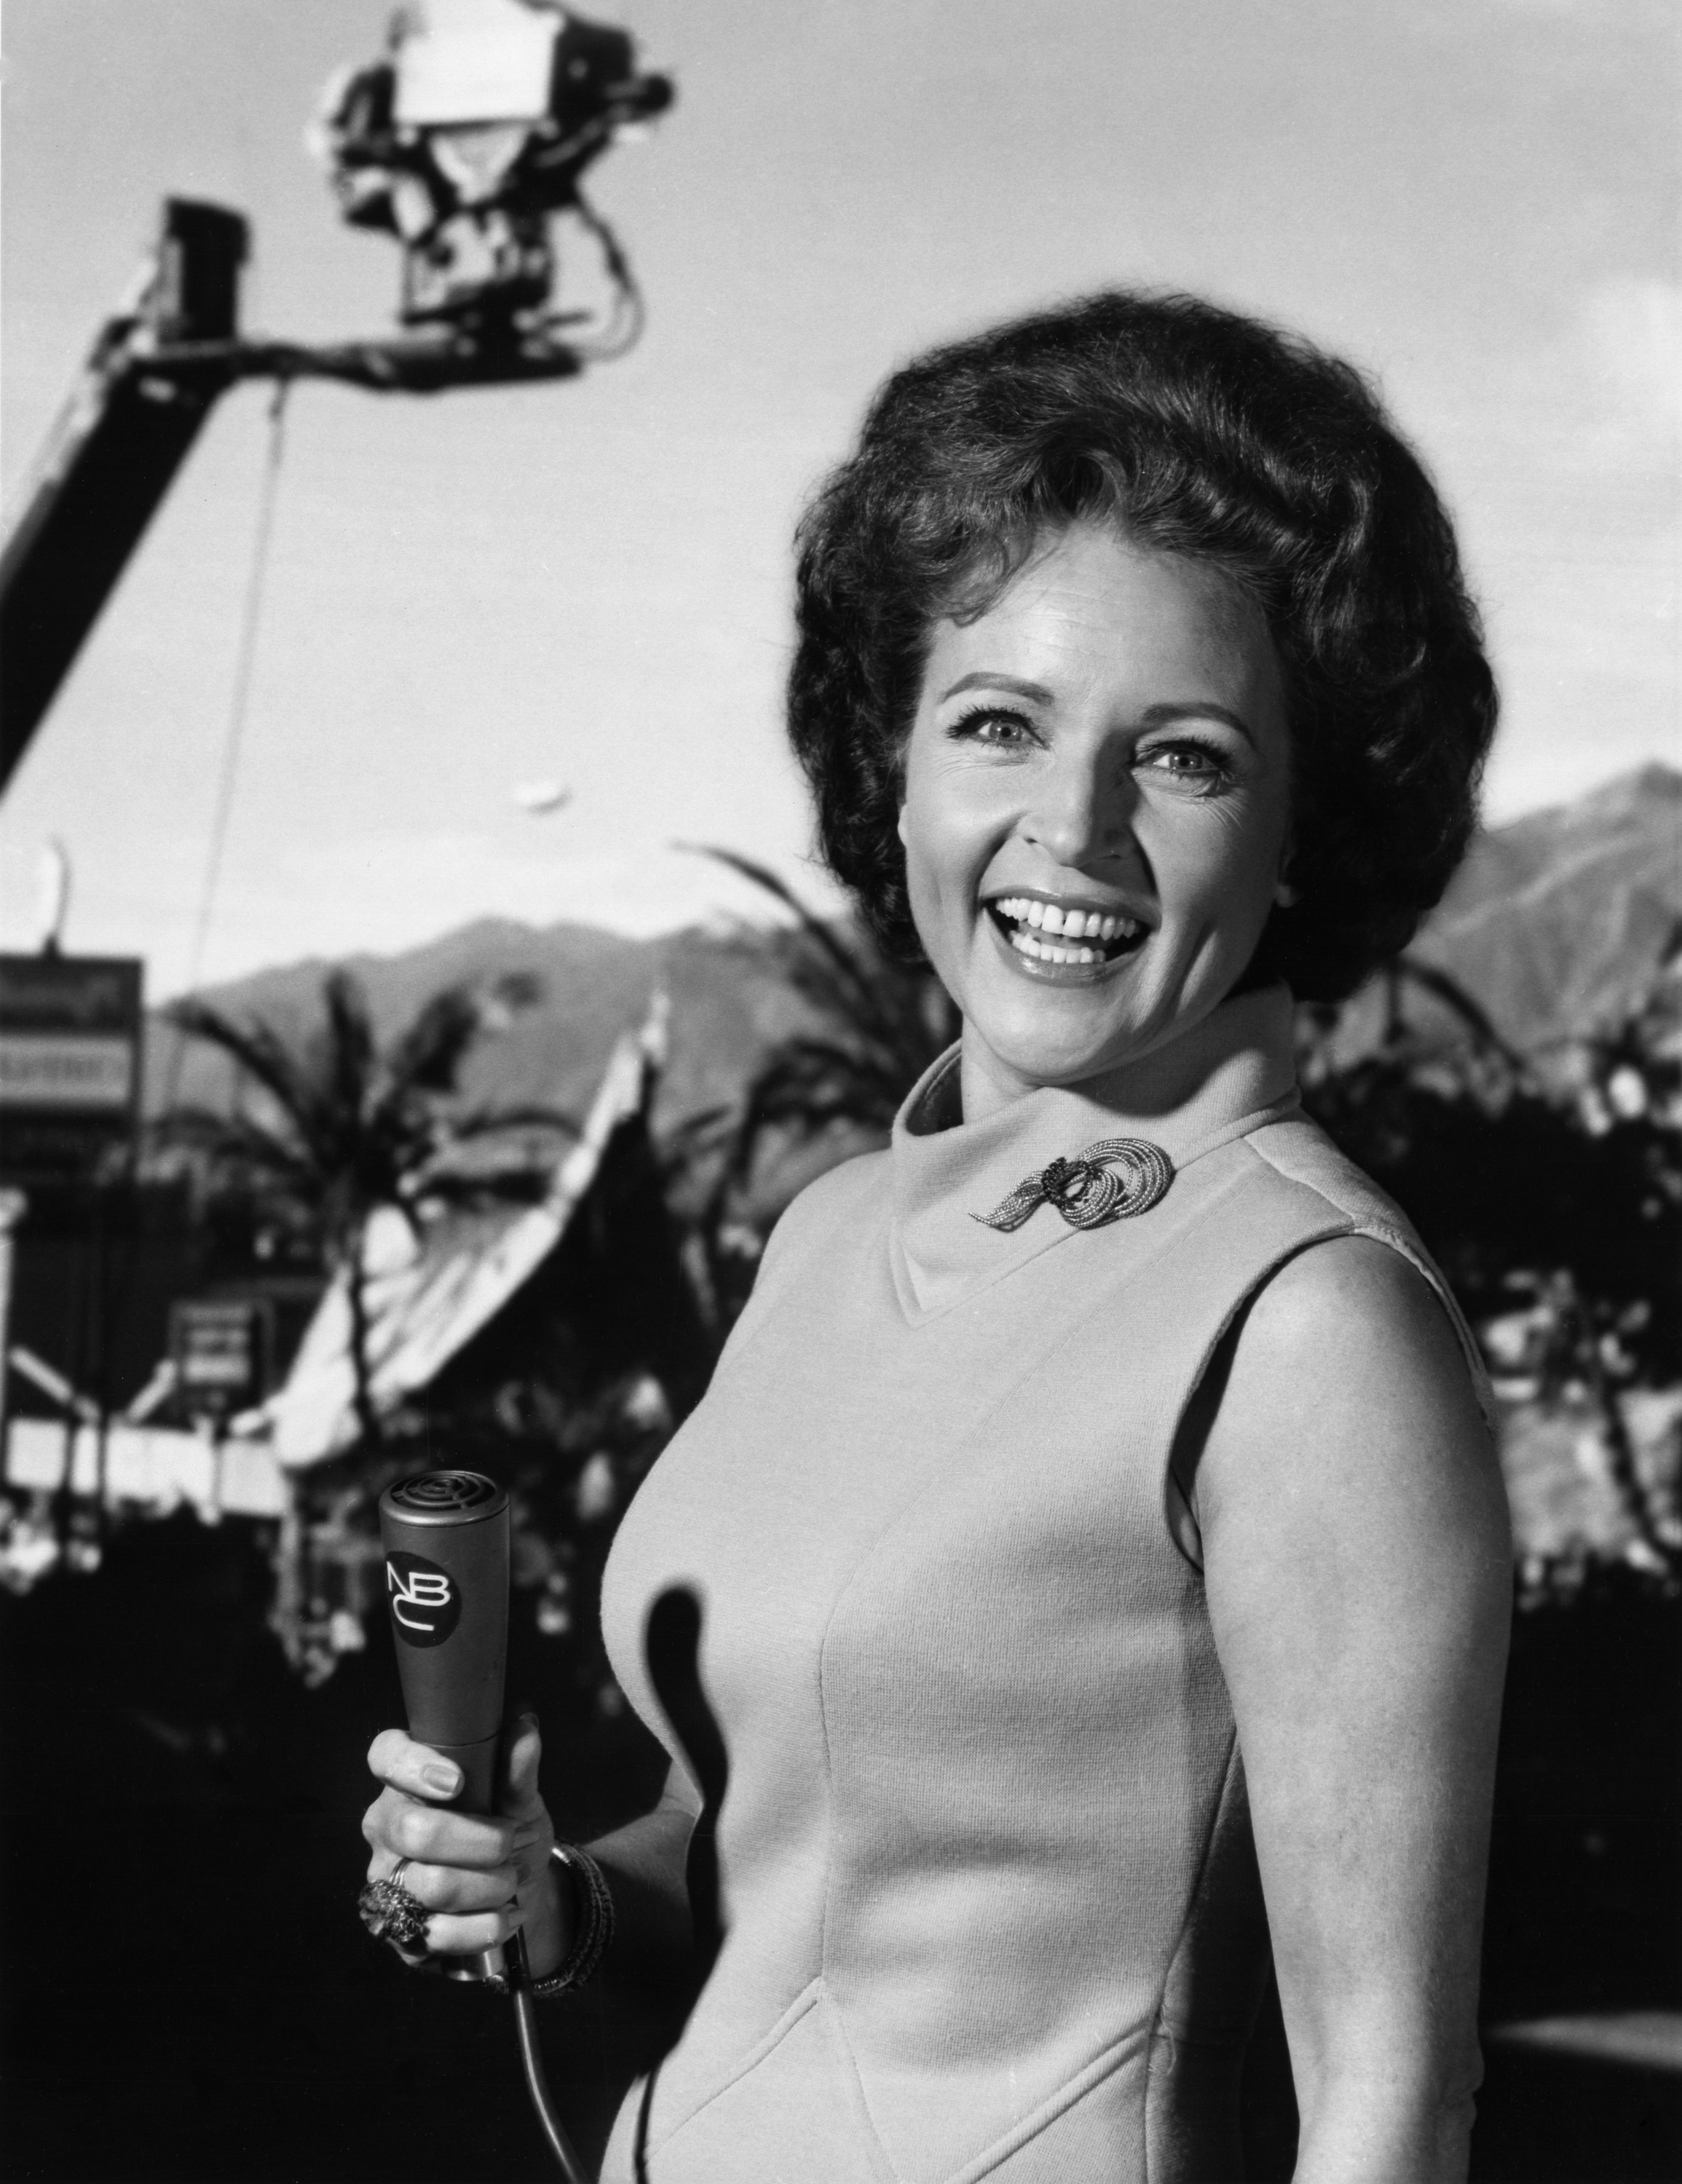 Woman in a sleeveless dress with a rose brooch, holding a microphone, smiling with a camera crane in the background